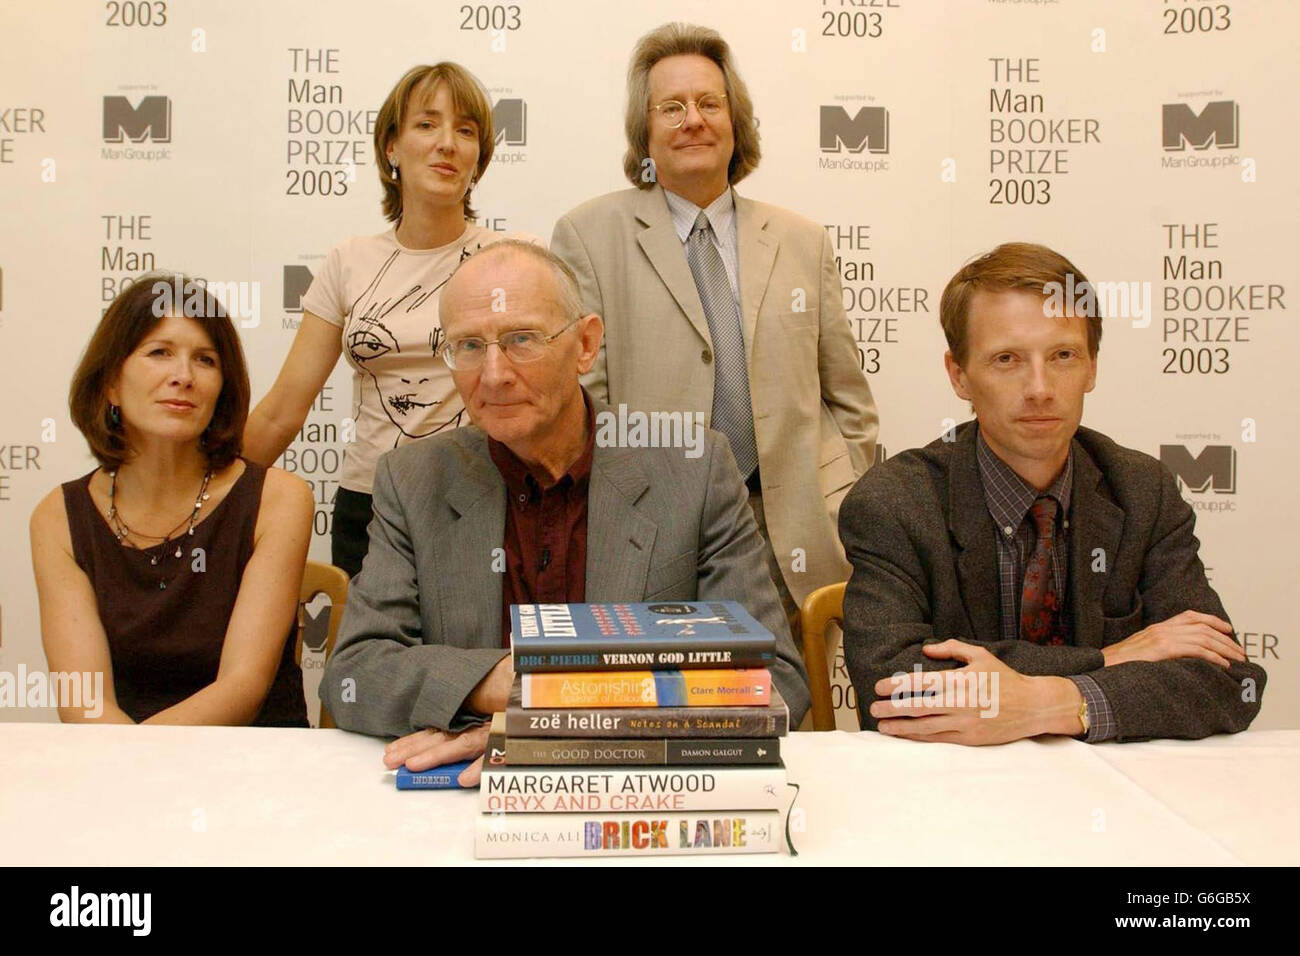 The Man Booker Prize 2003 Stock Photo